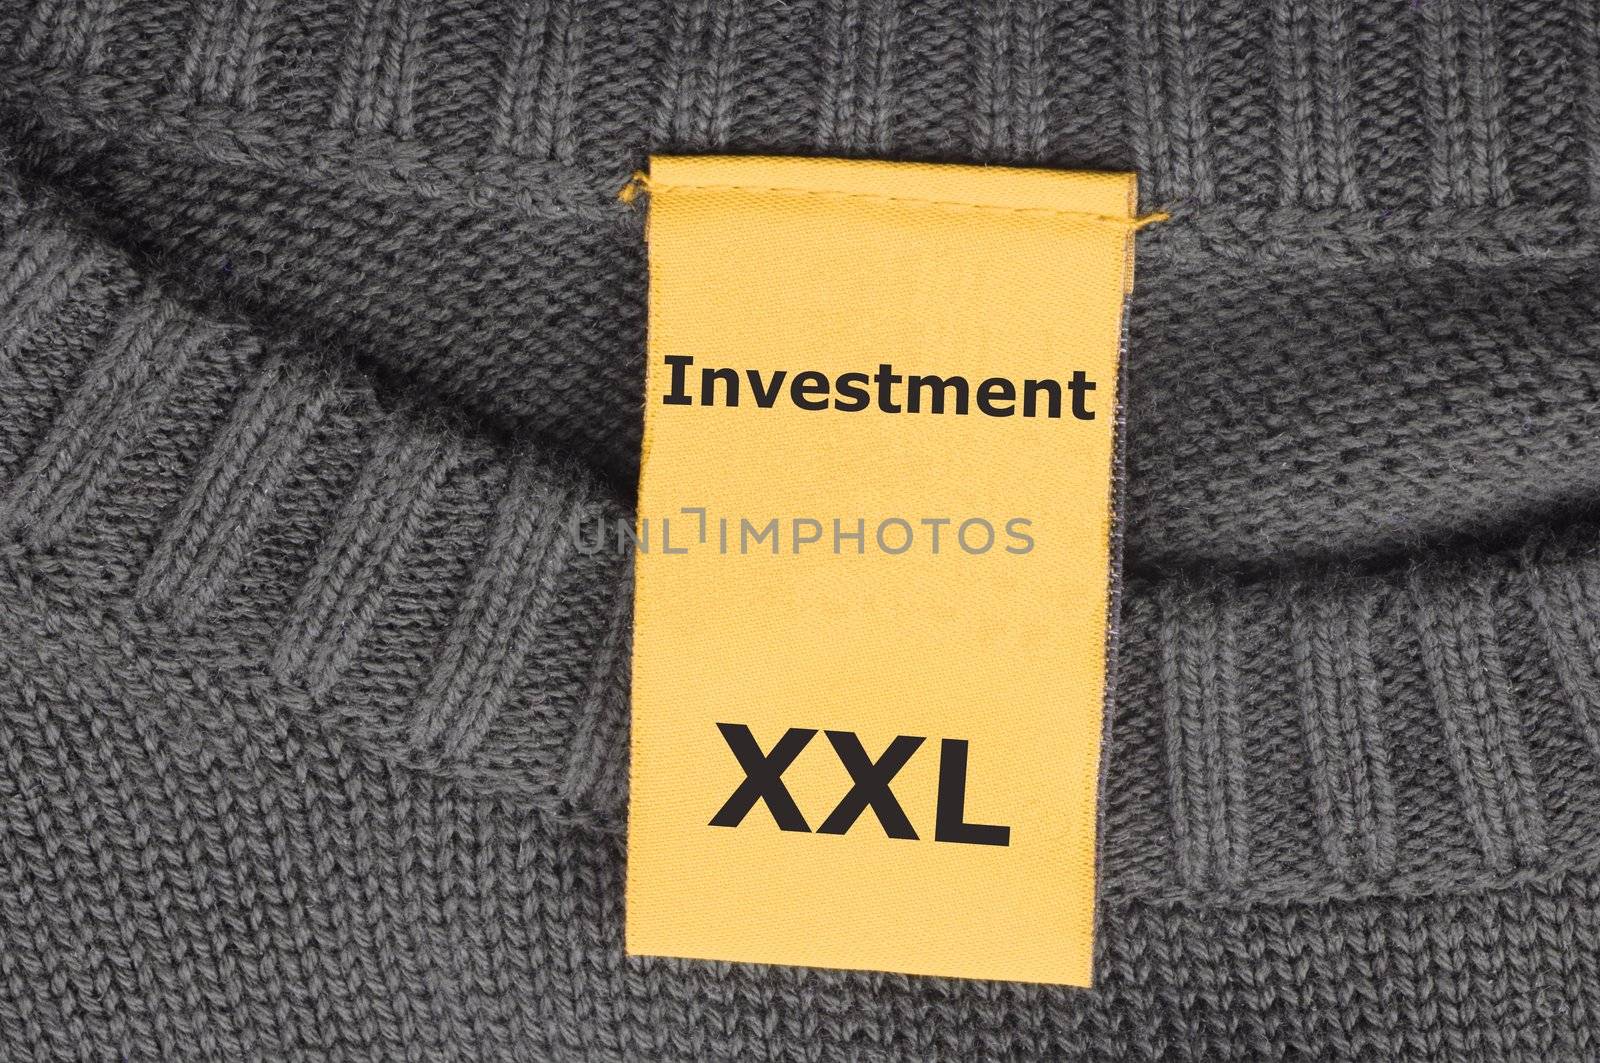 investment xxl label showing financial business success concept